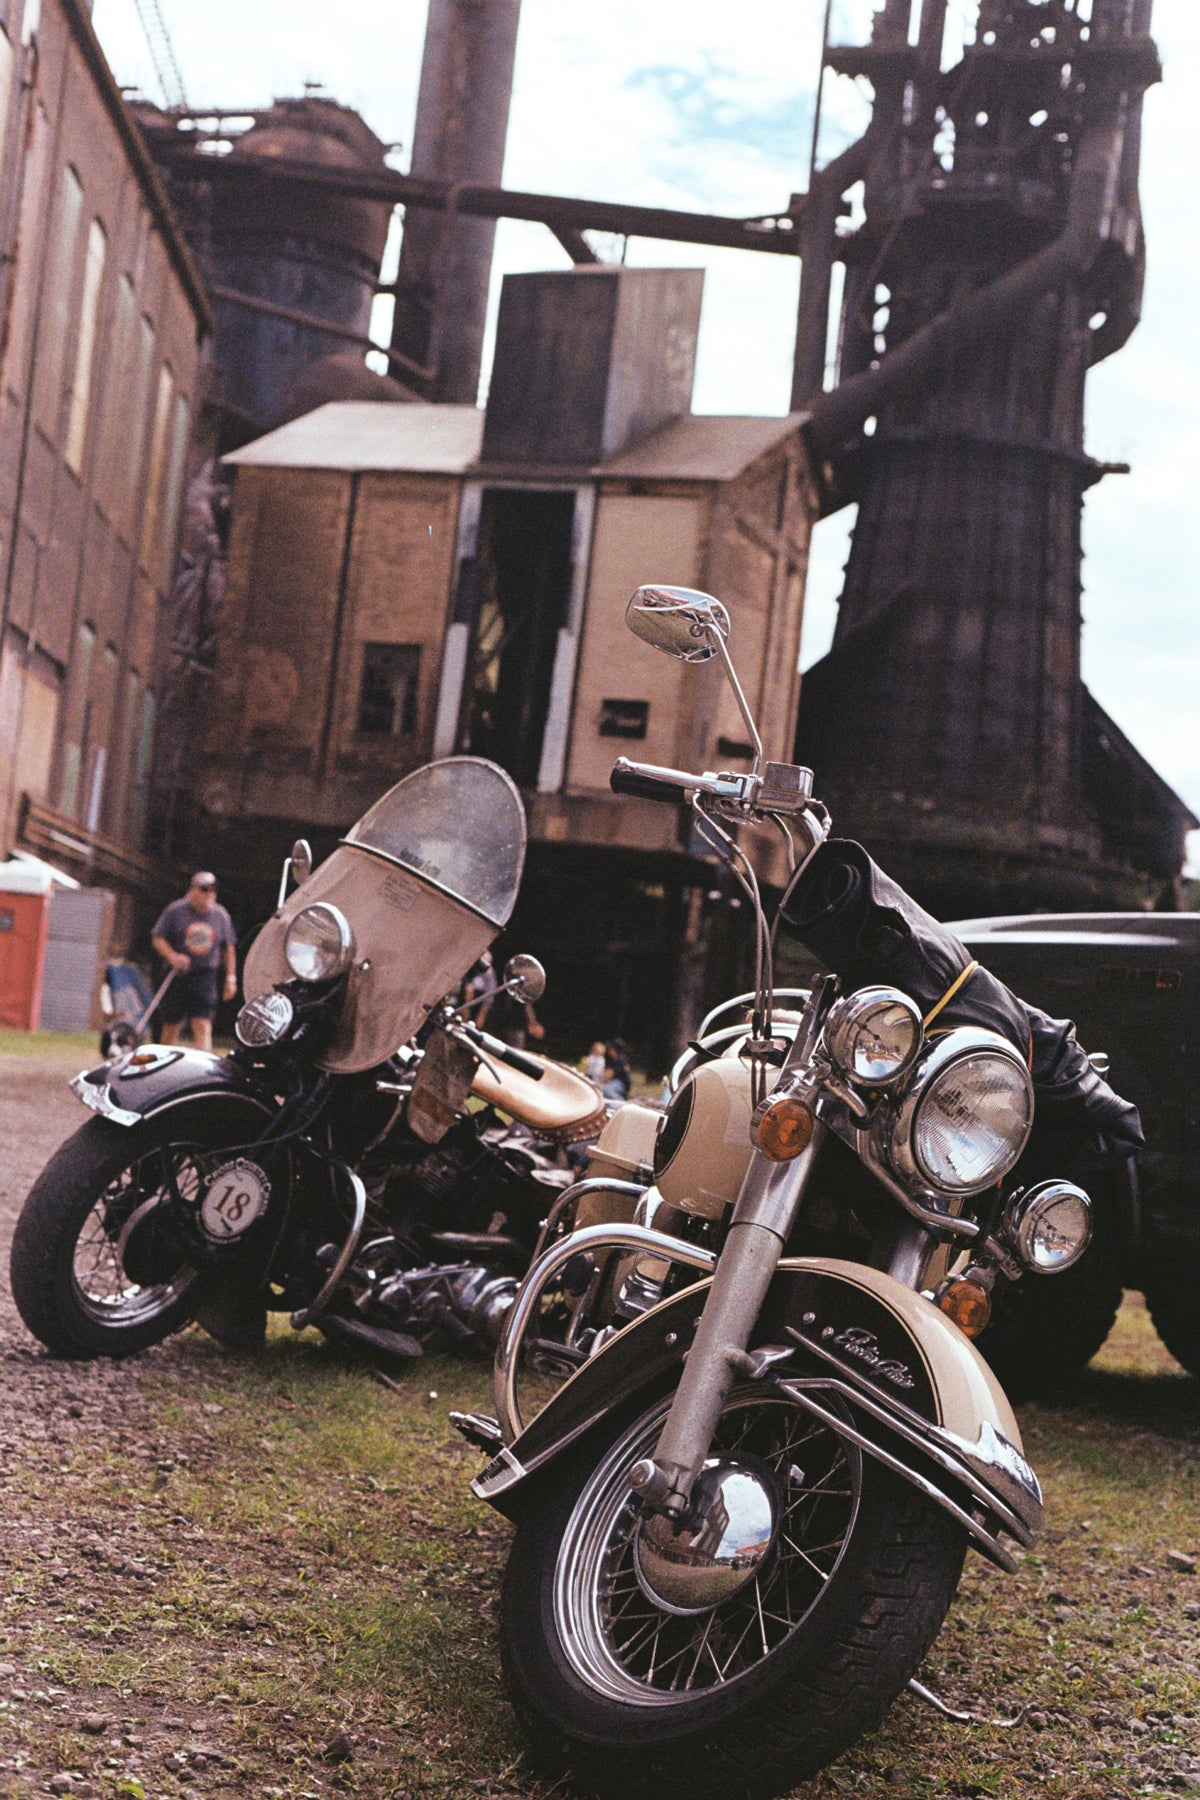 Glory Daze Motorcycle Show Pittsburgh 35mm film photos